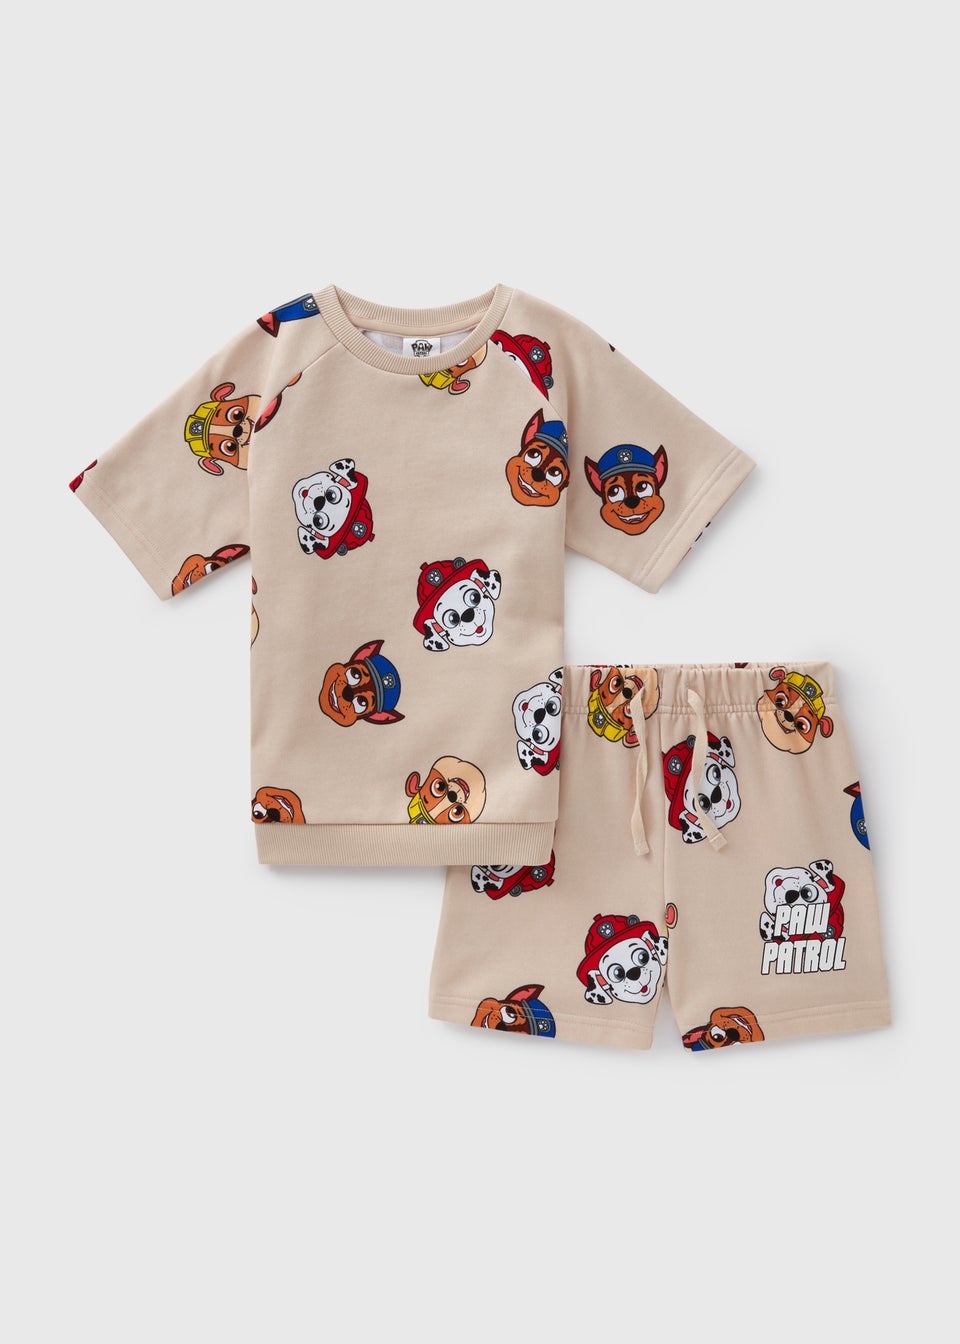 Paw Patrol Boys Oatmeal Top and Short Sets (1-6yrs)